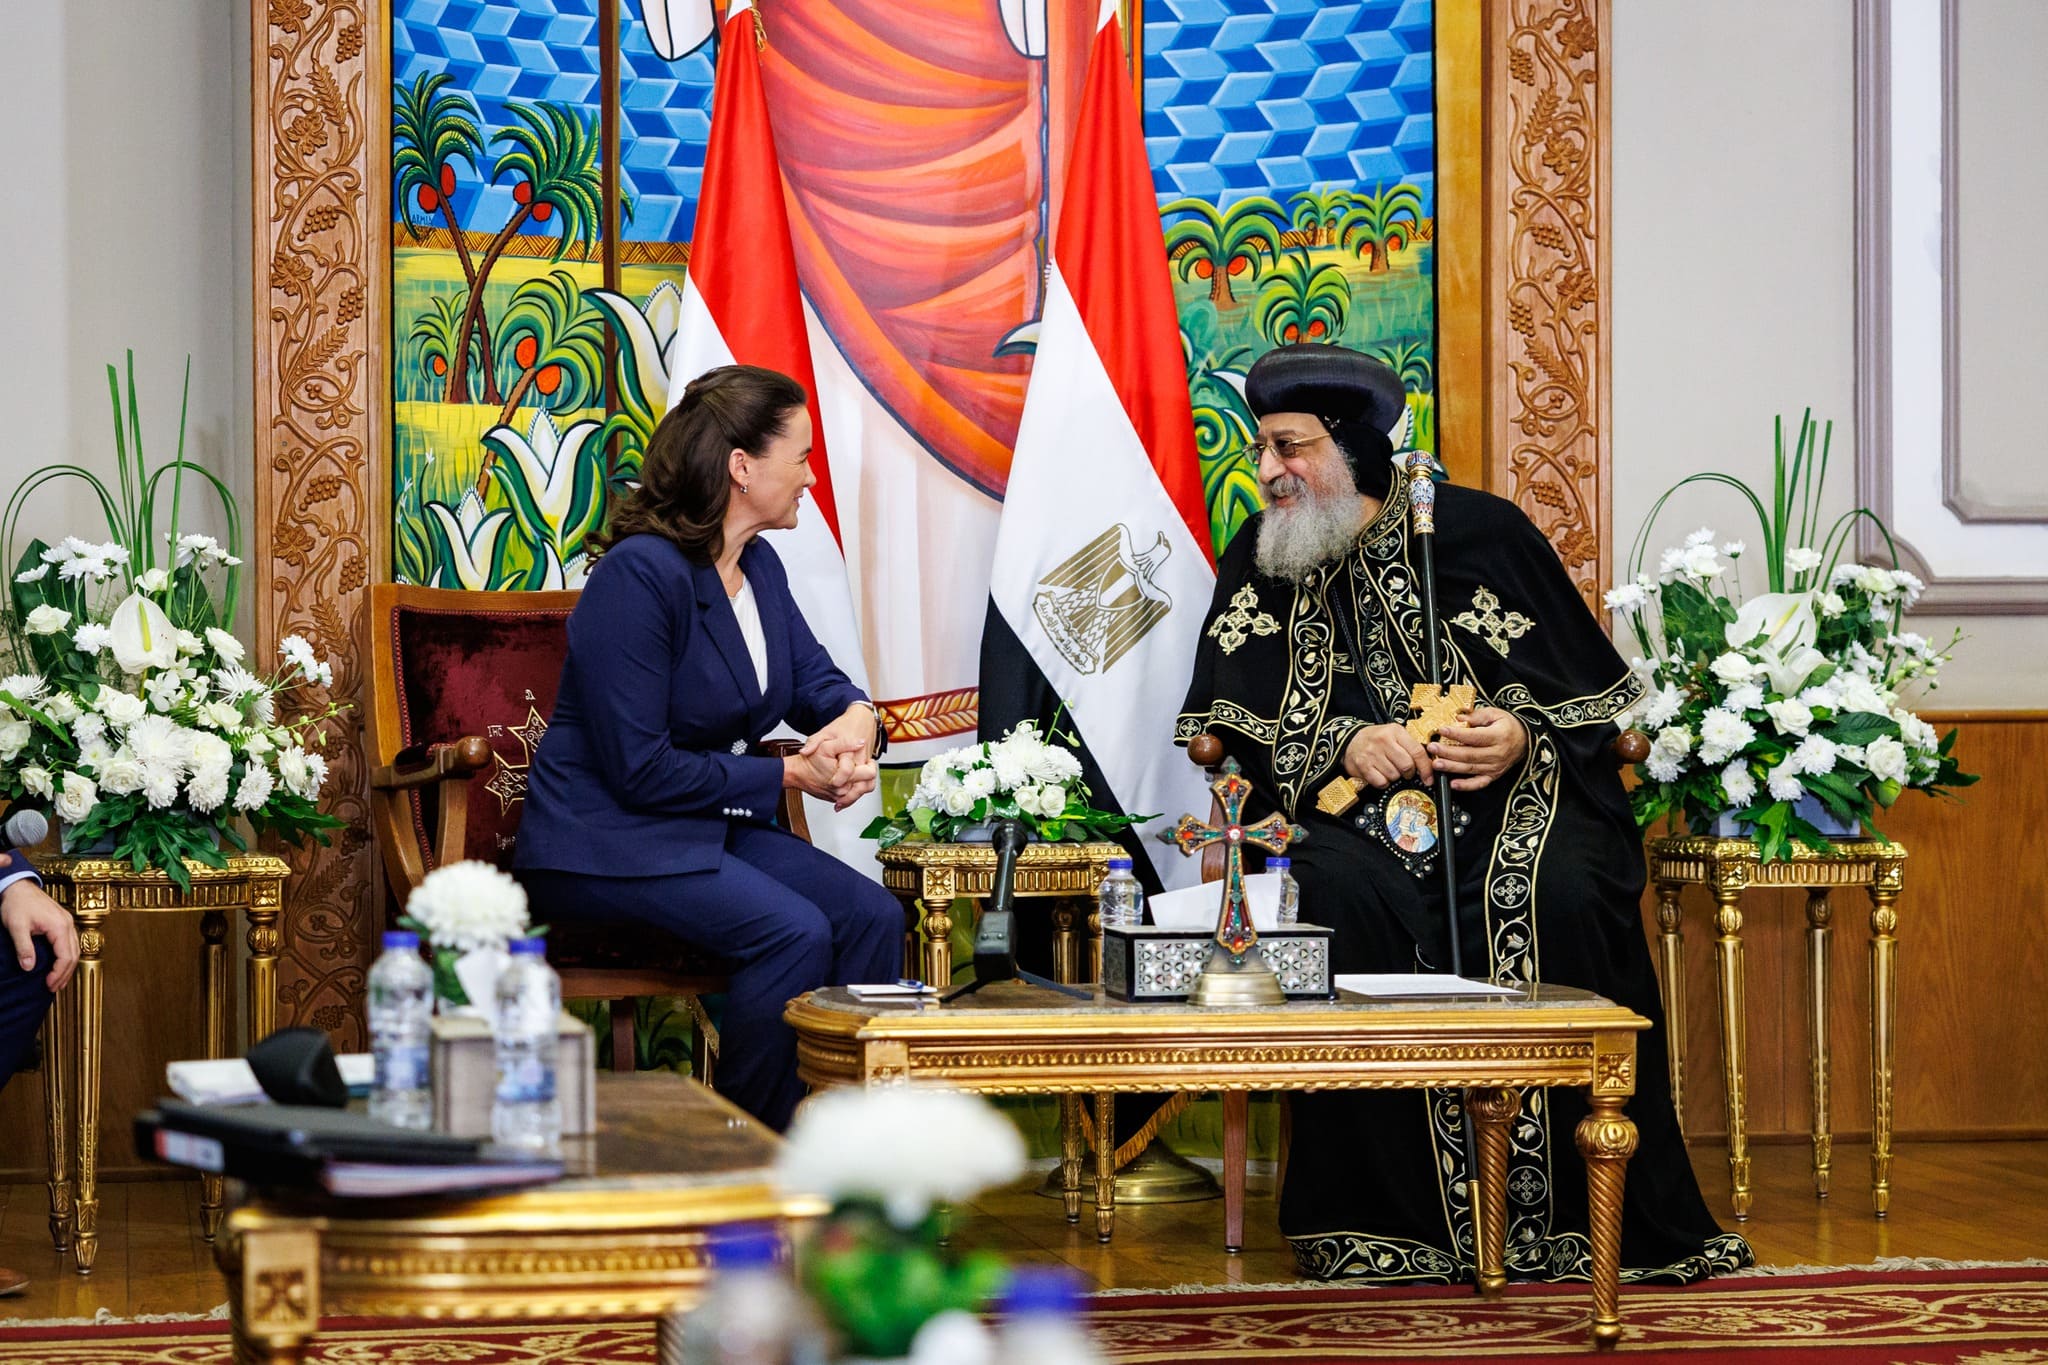 President of Hungary Visits Pope Tawadros II in Egypt, Emphasizes Commitment to Peace and Interfaith Harmony